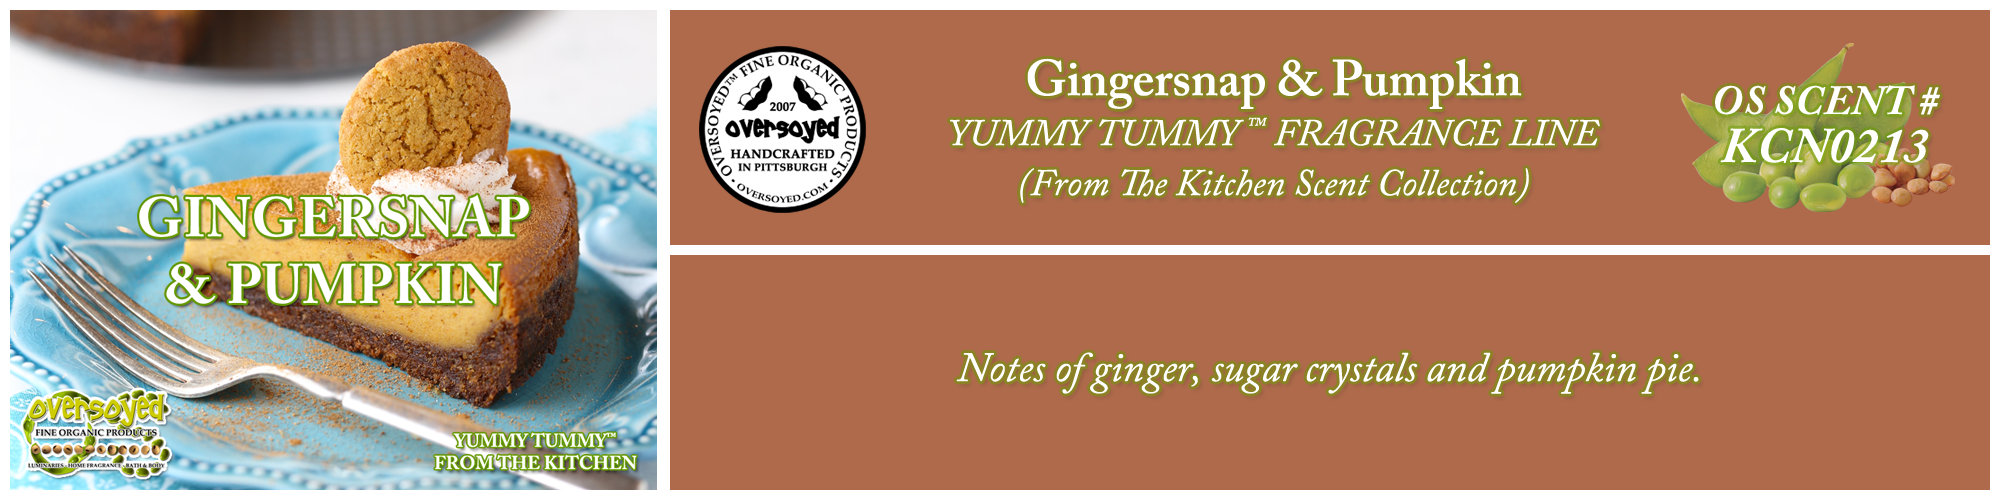 Gingersnap & Pumpkin Handcrafted Products Collection